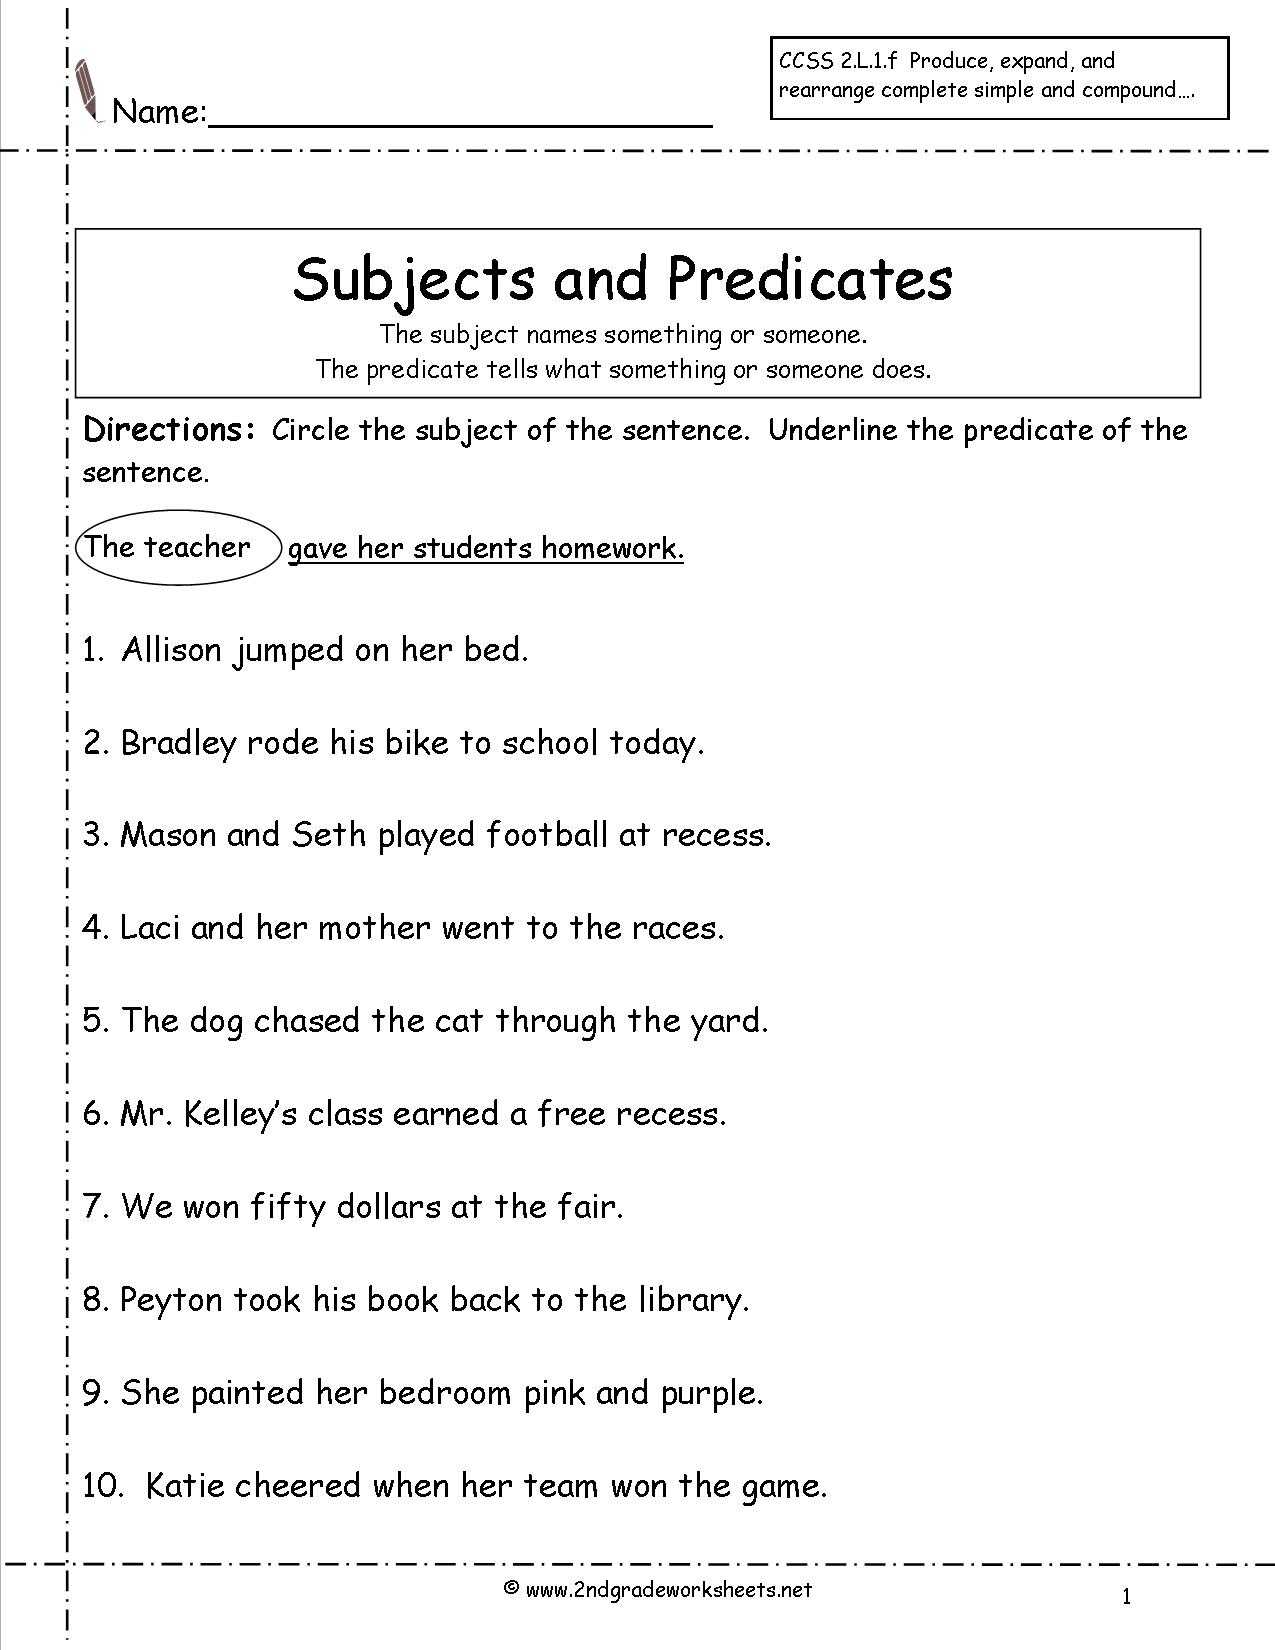 Simple Subject and Predicate Worksheets as Well as Simple Subject and Predicate Worksheet Worksheets for All